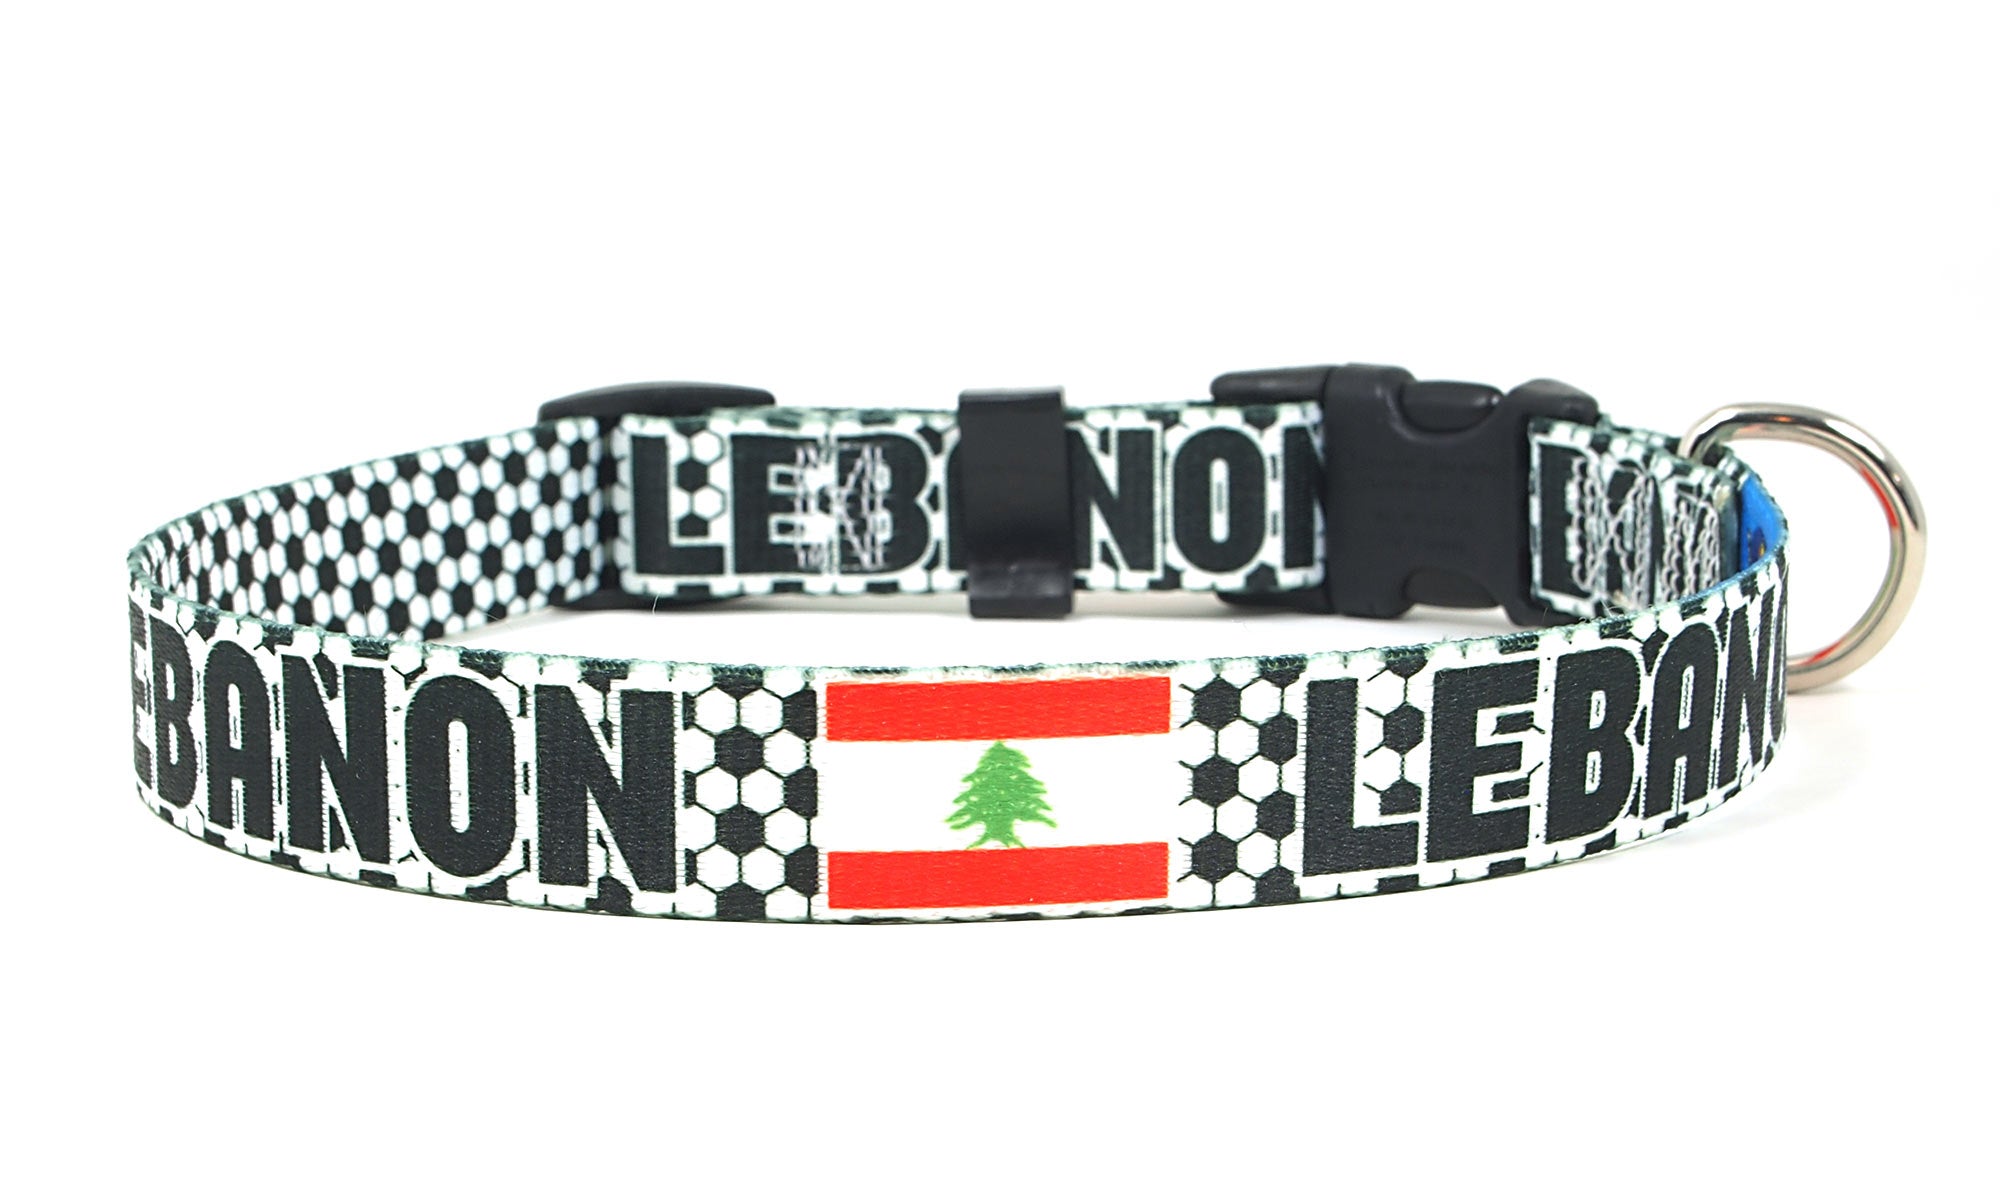 Lebanon Dog Collar for Soccer Fans | Black or Pink | Quick Release or Martingale Style | Made in NJ, USA